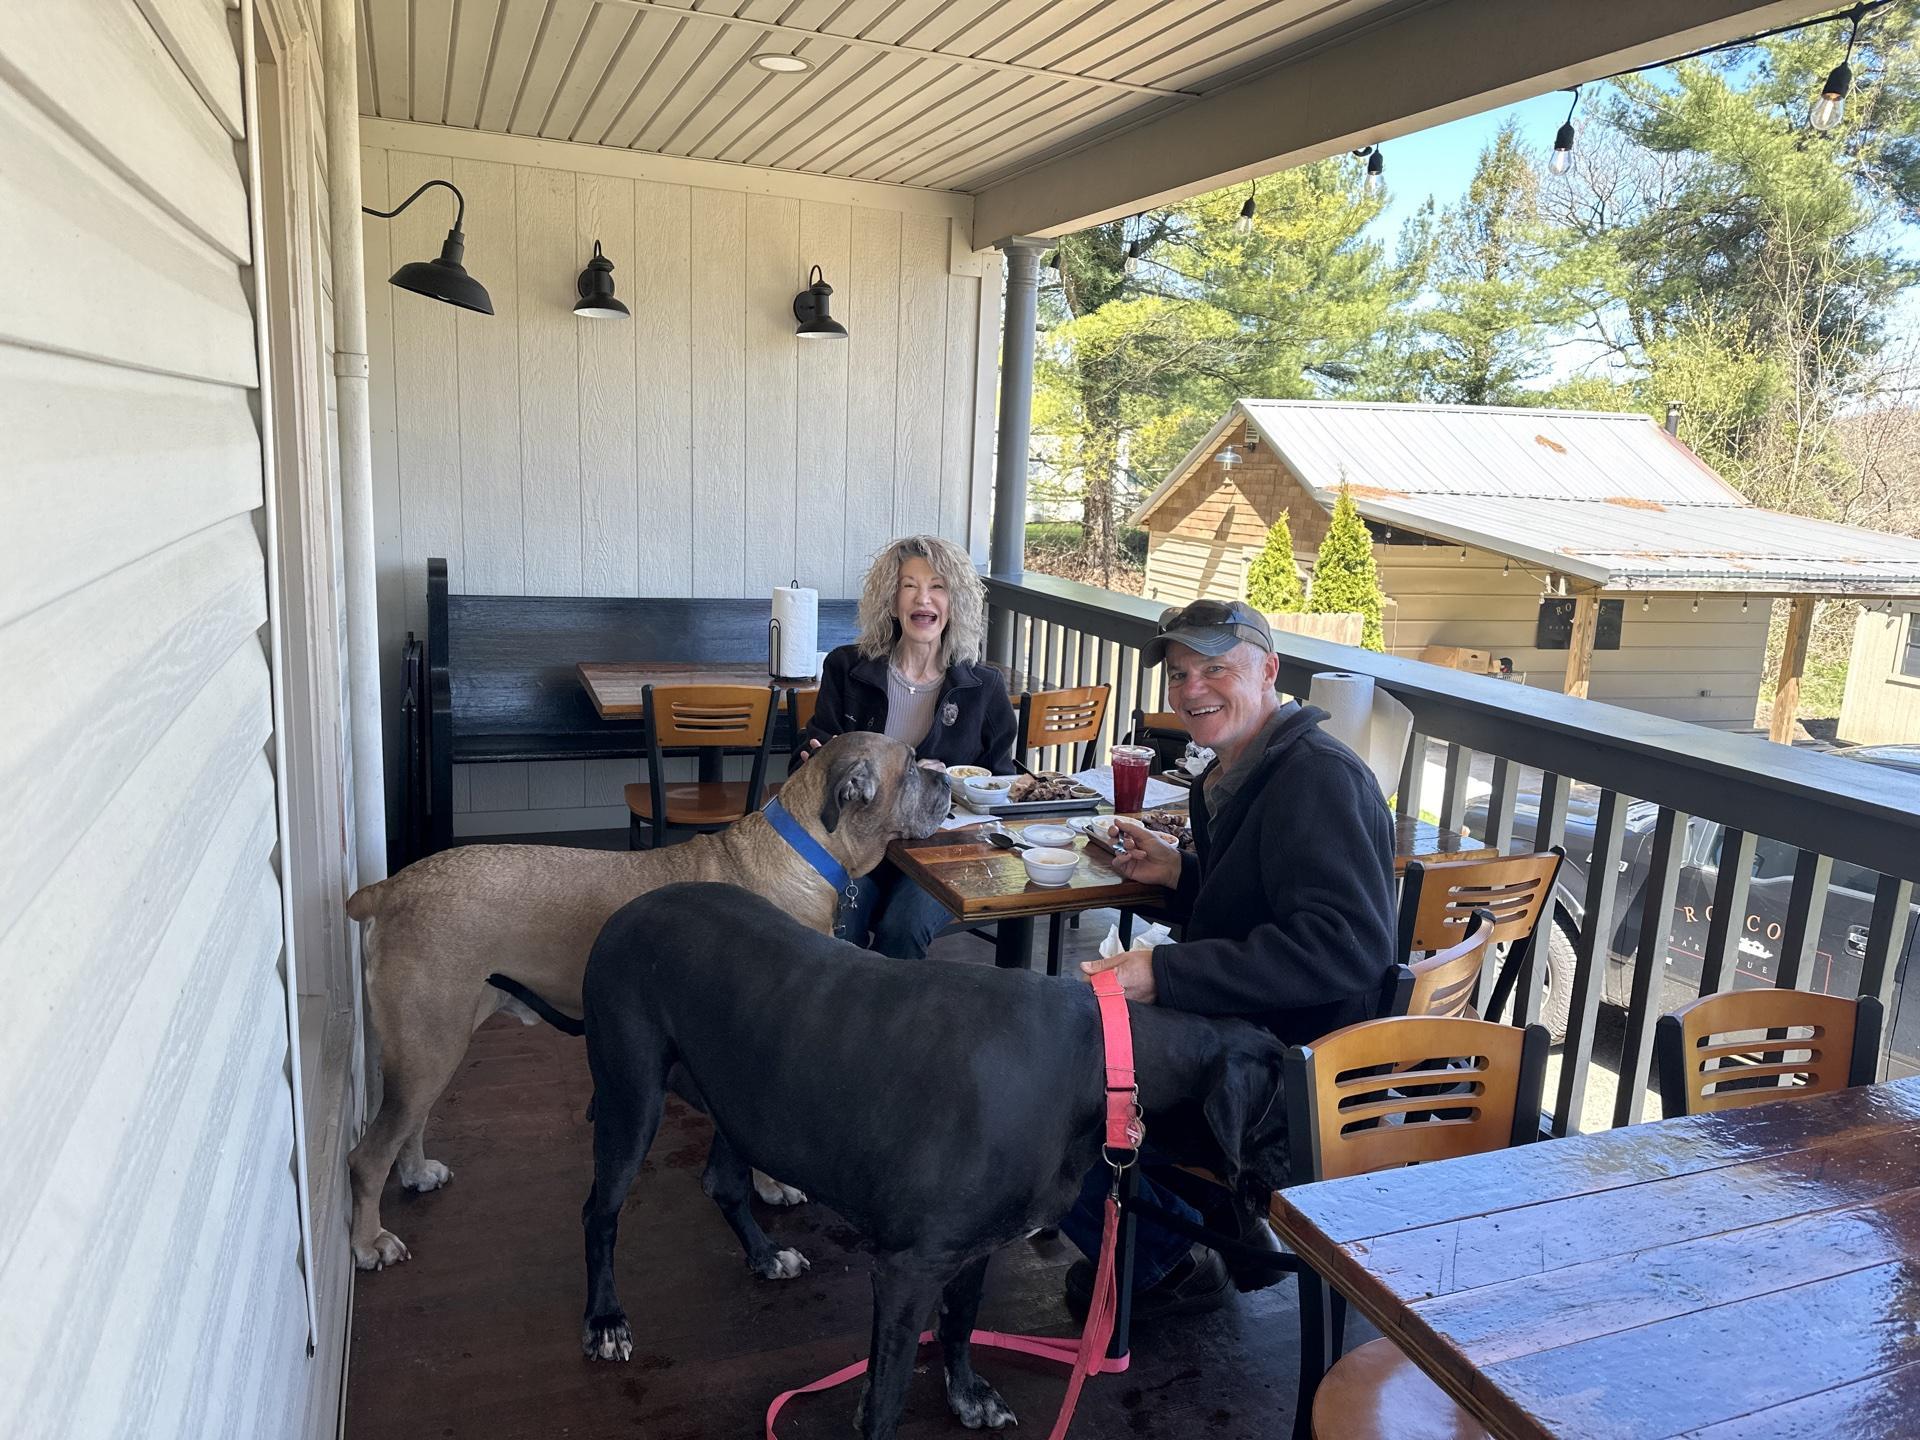 Pet Friendly Roscoe Barbeque Co.